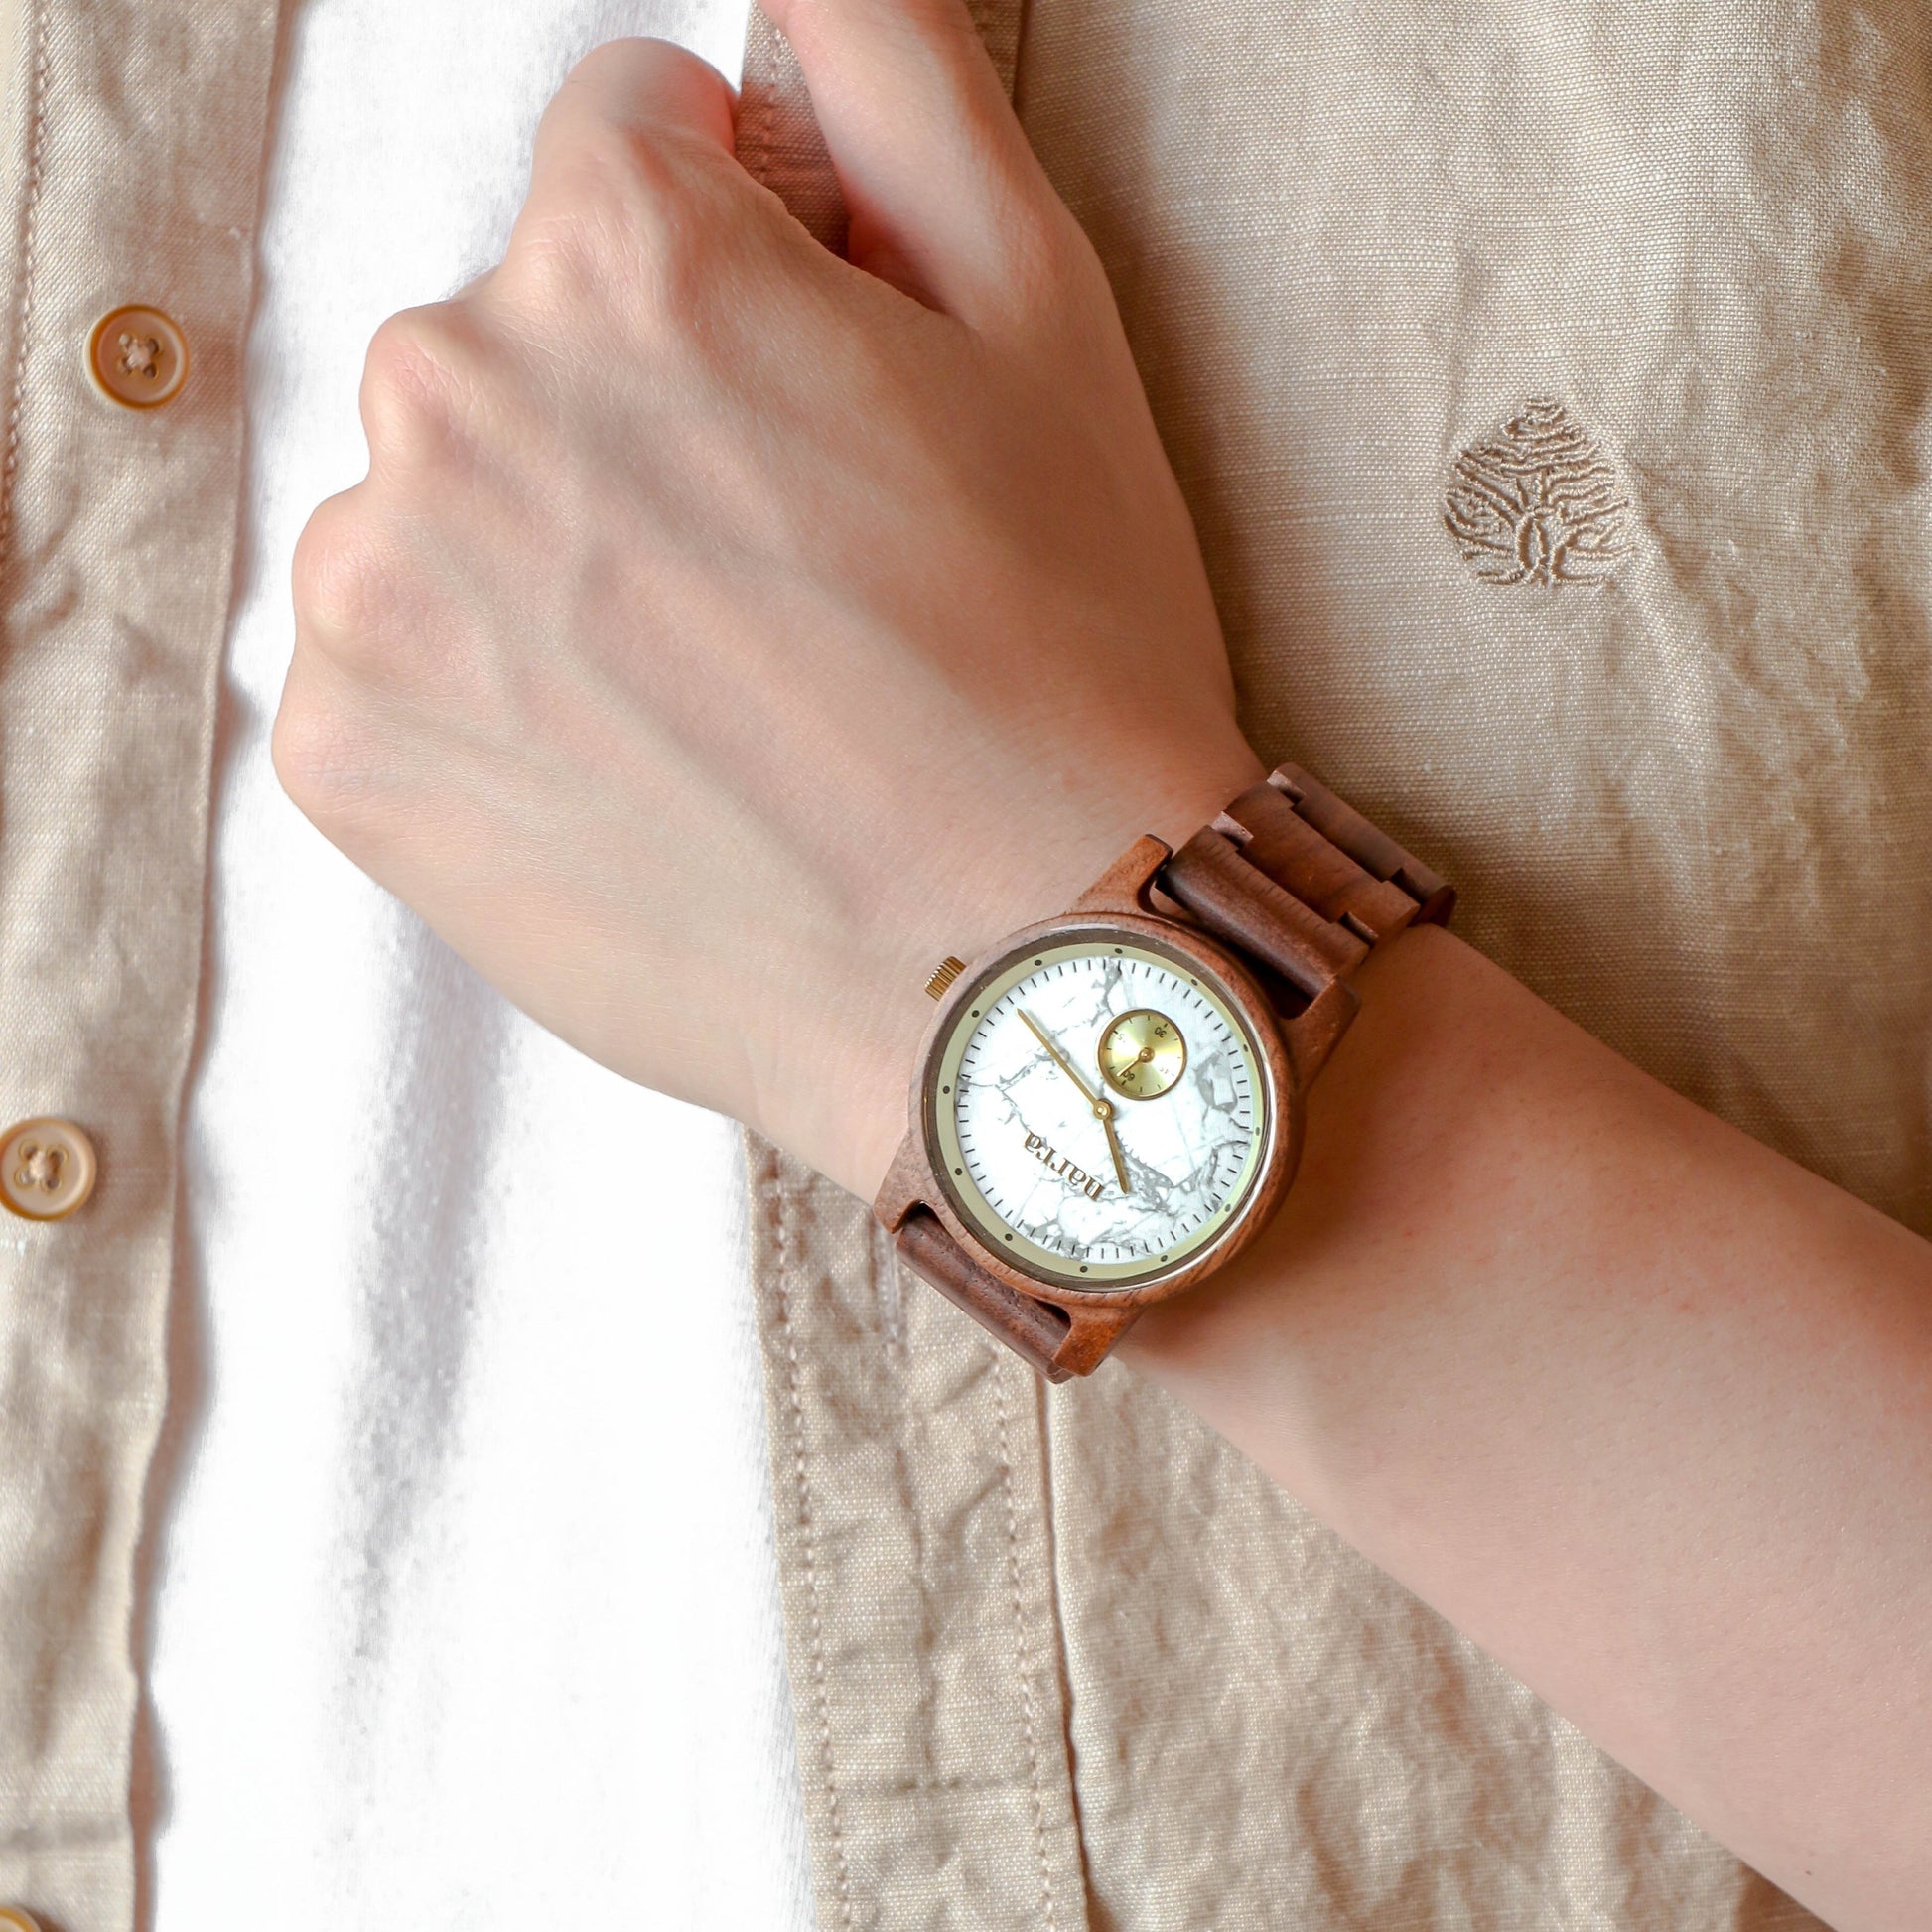 Beach Sand in Walnut and White Marble - Narra Wooden Watches